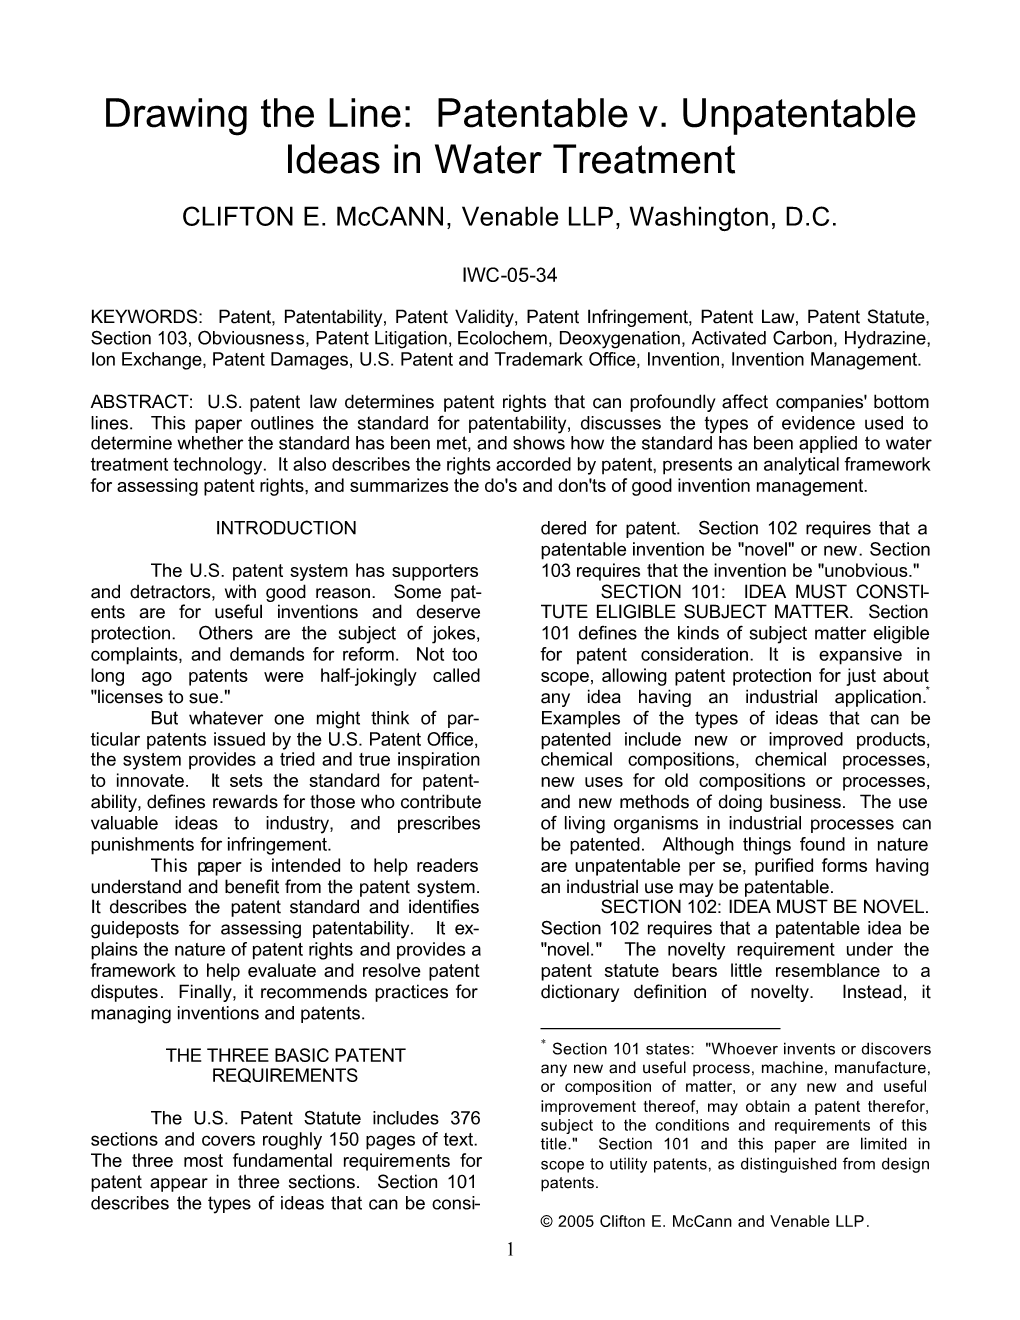 Patentable V. Unpatentable Ideas in Water Treatment